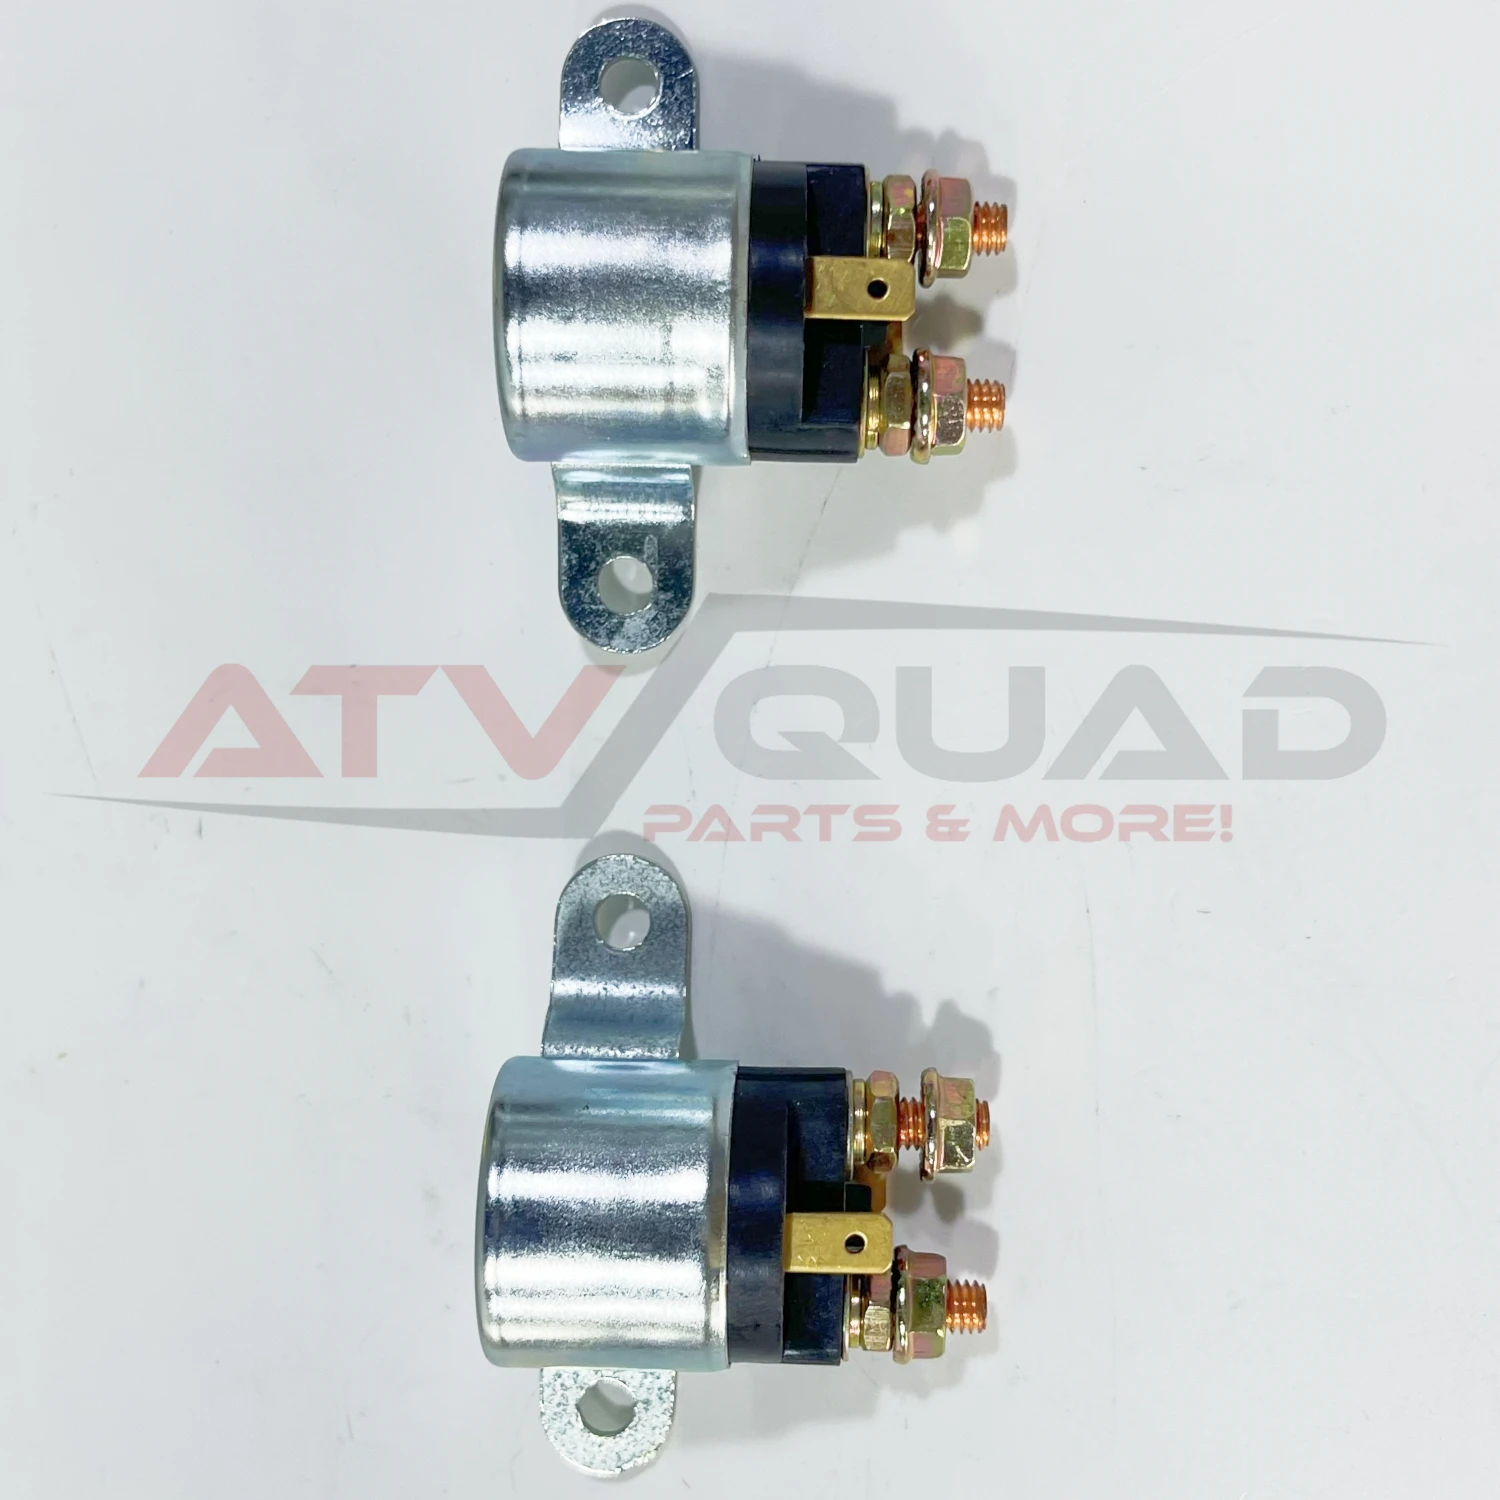 2PCS Solenoid Relay for Can-am Outlander Renegade 400 450 500 570 650 800 850 1000 Bombardier Traxter 500 DS650 Spyder GS 990